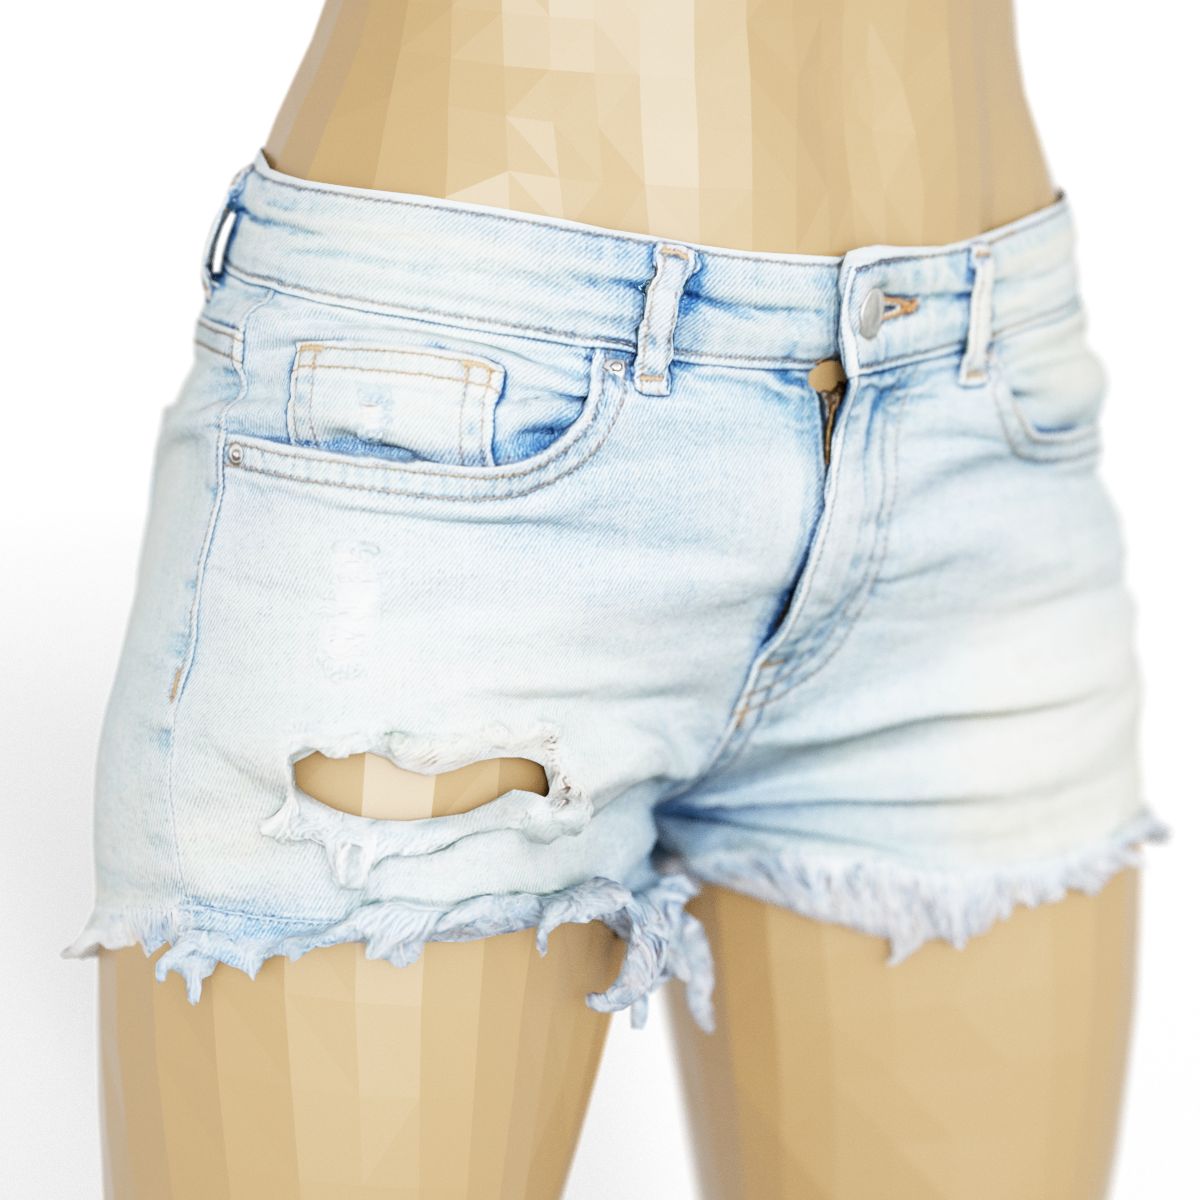 Vintage Shorts Jeans Light Ripped